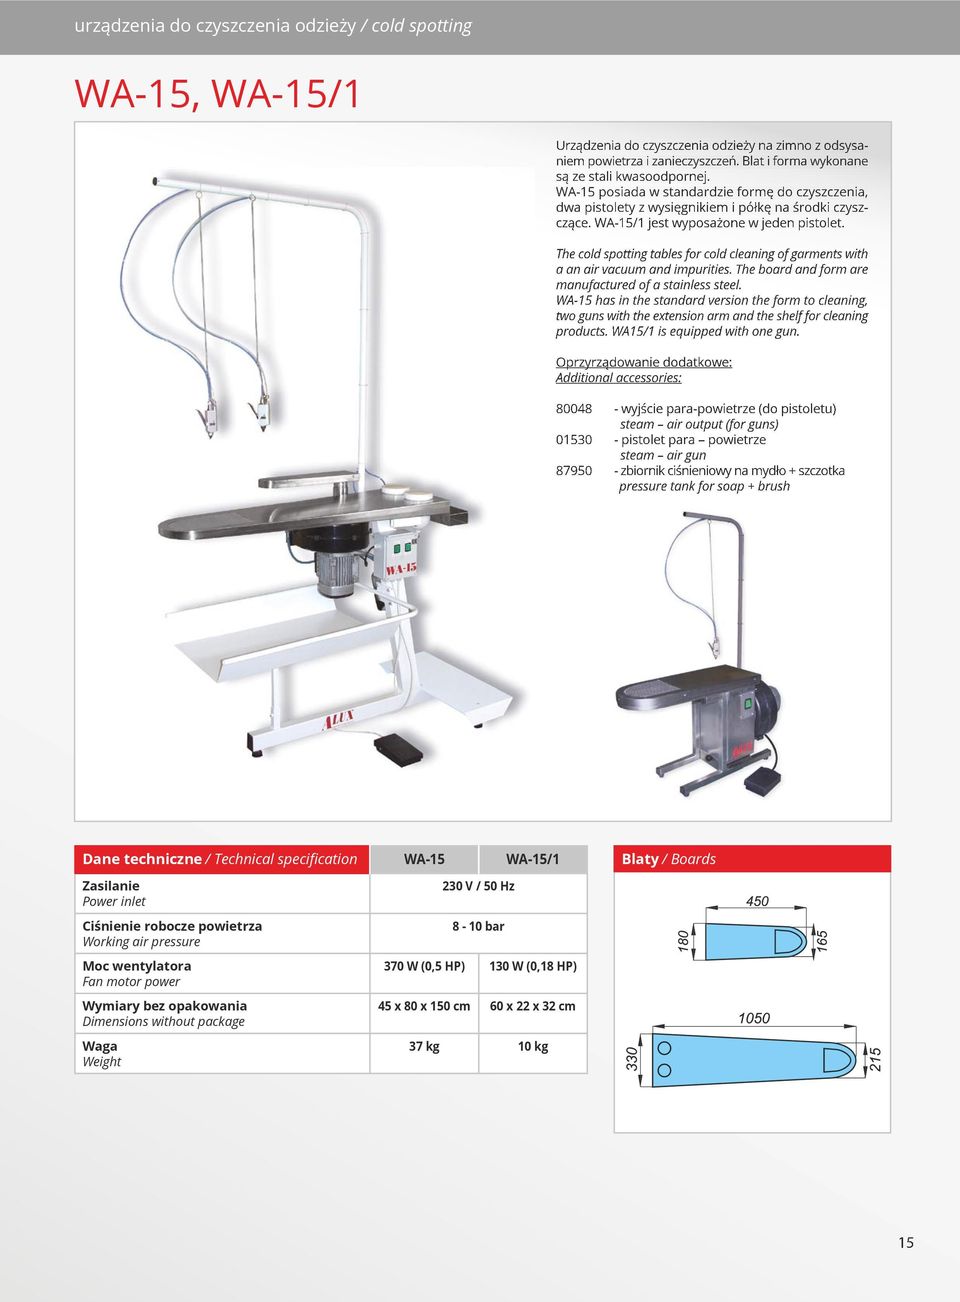 The cold spotting tables for cold cleaning of garments with a an air vacuum and impurities. The board and form are manufactured of a stainless steel.